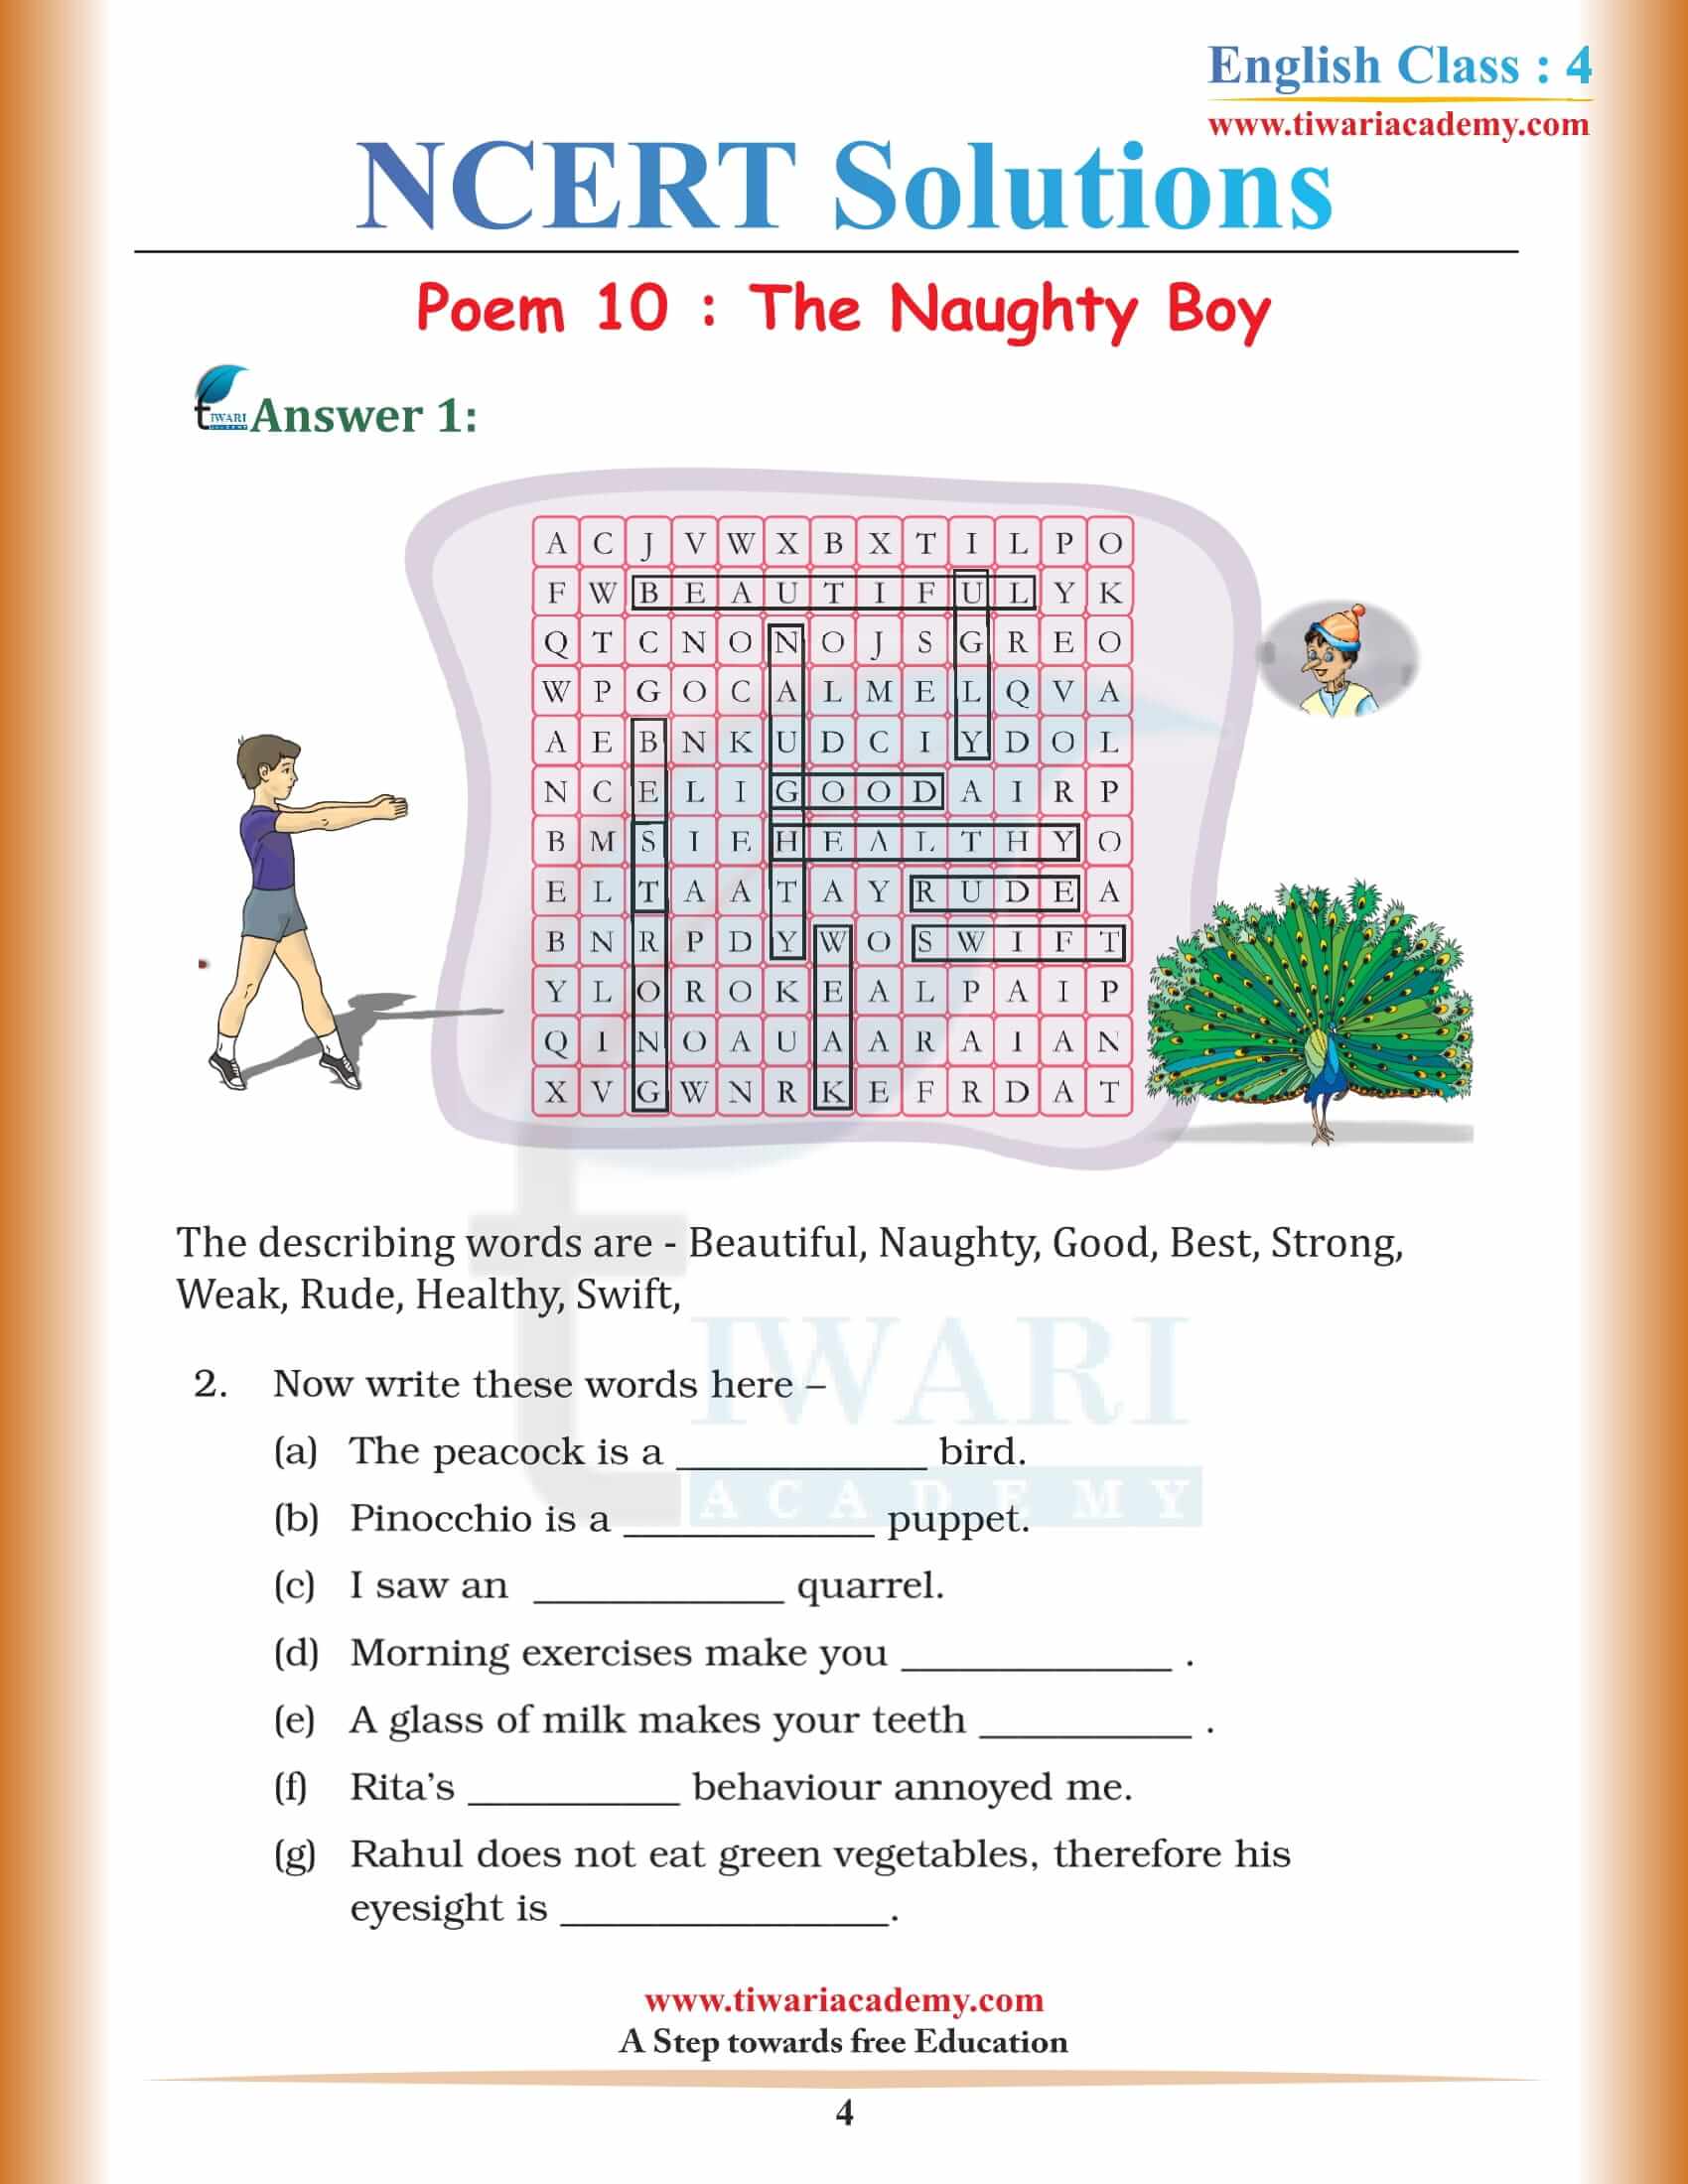 NCERT Solutions for Class 4 English Unit 10 free download